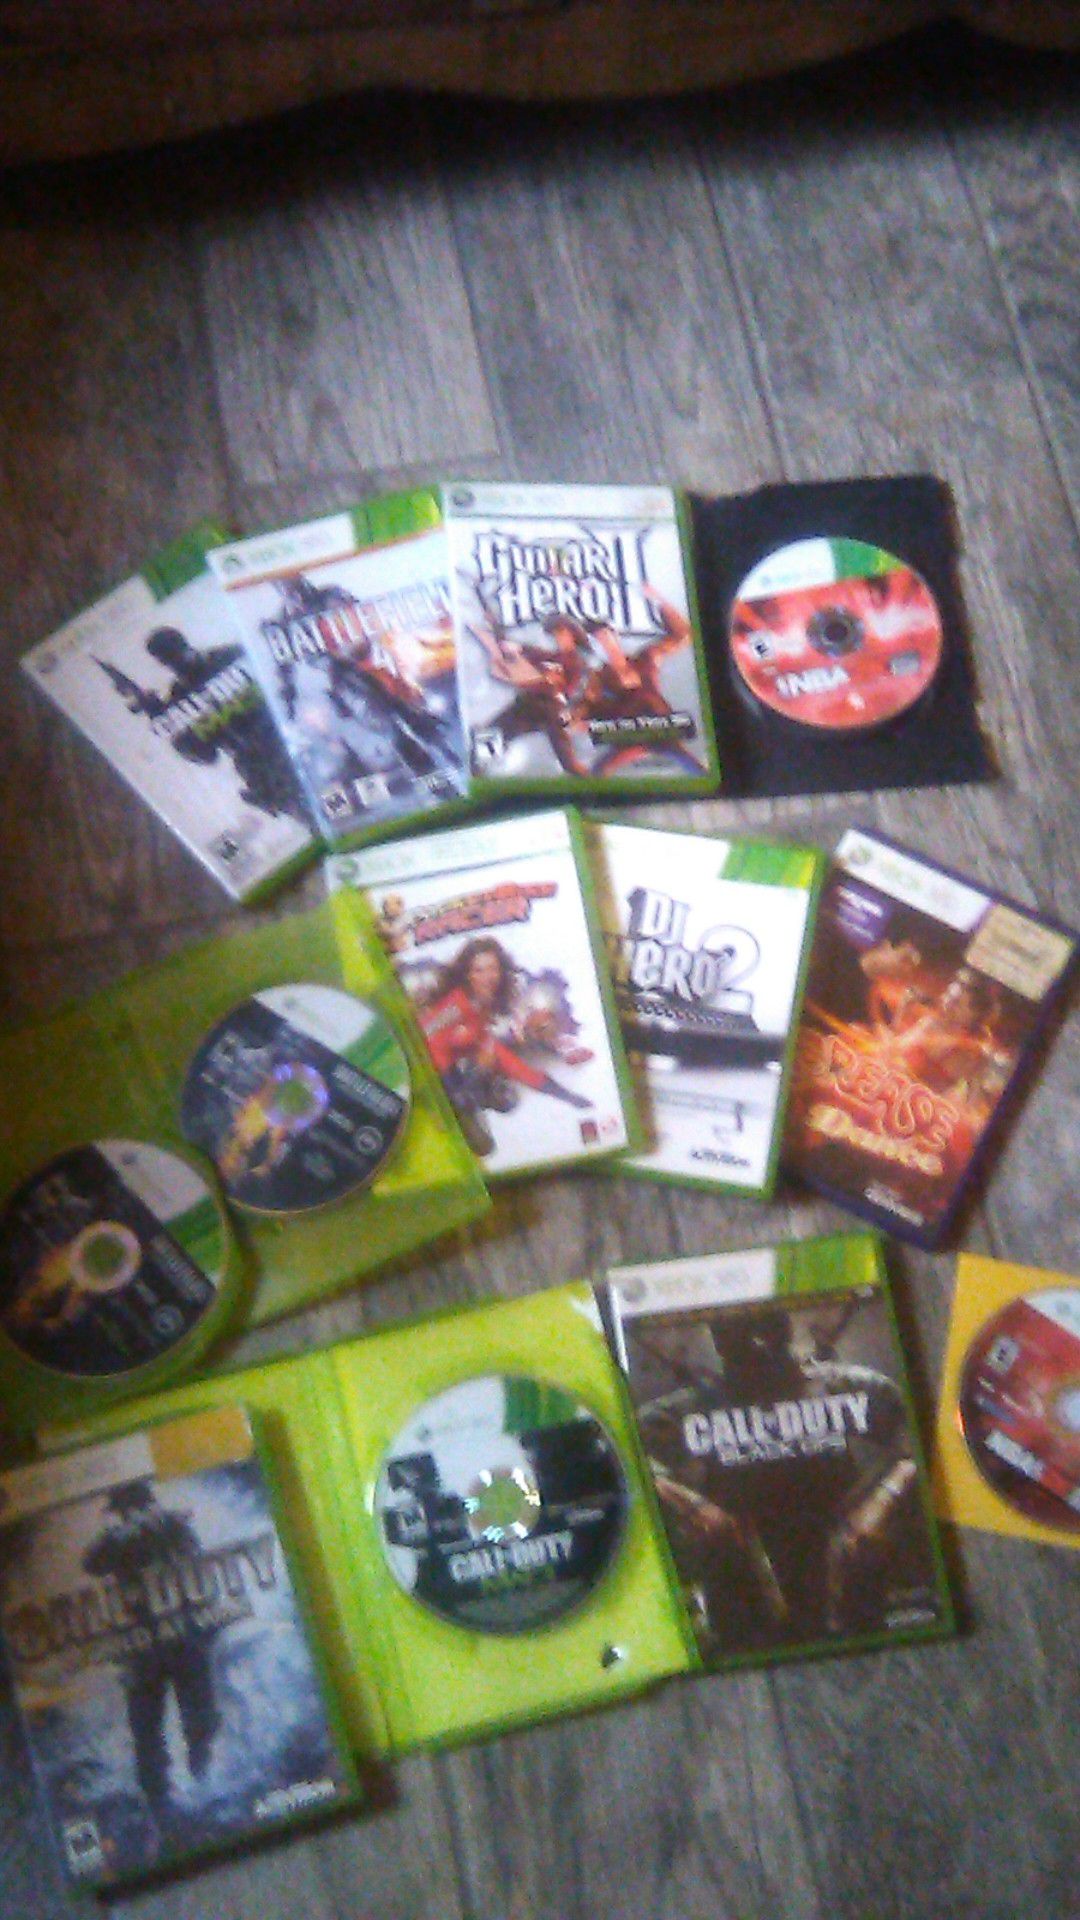 Xbox 360 games $15 for all 12